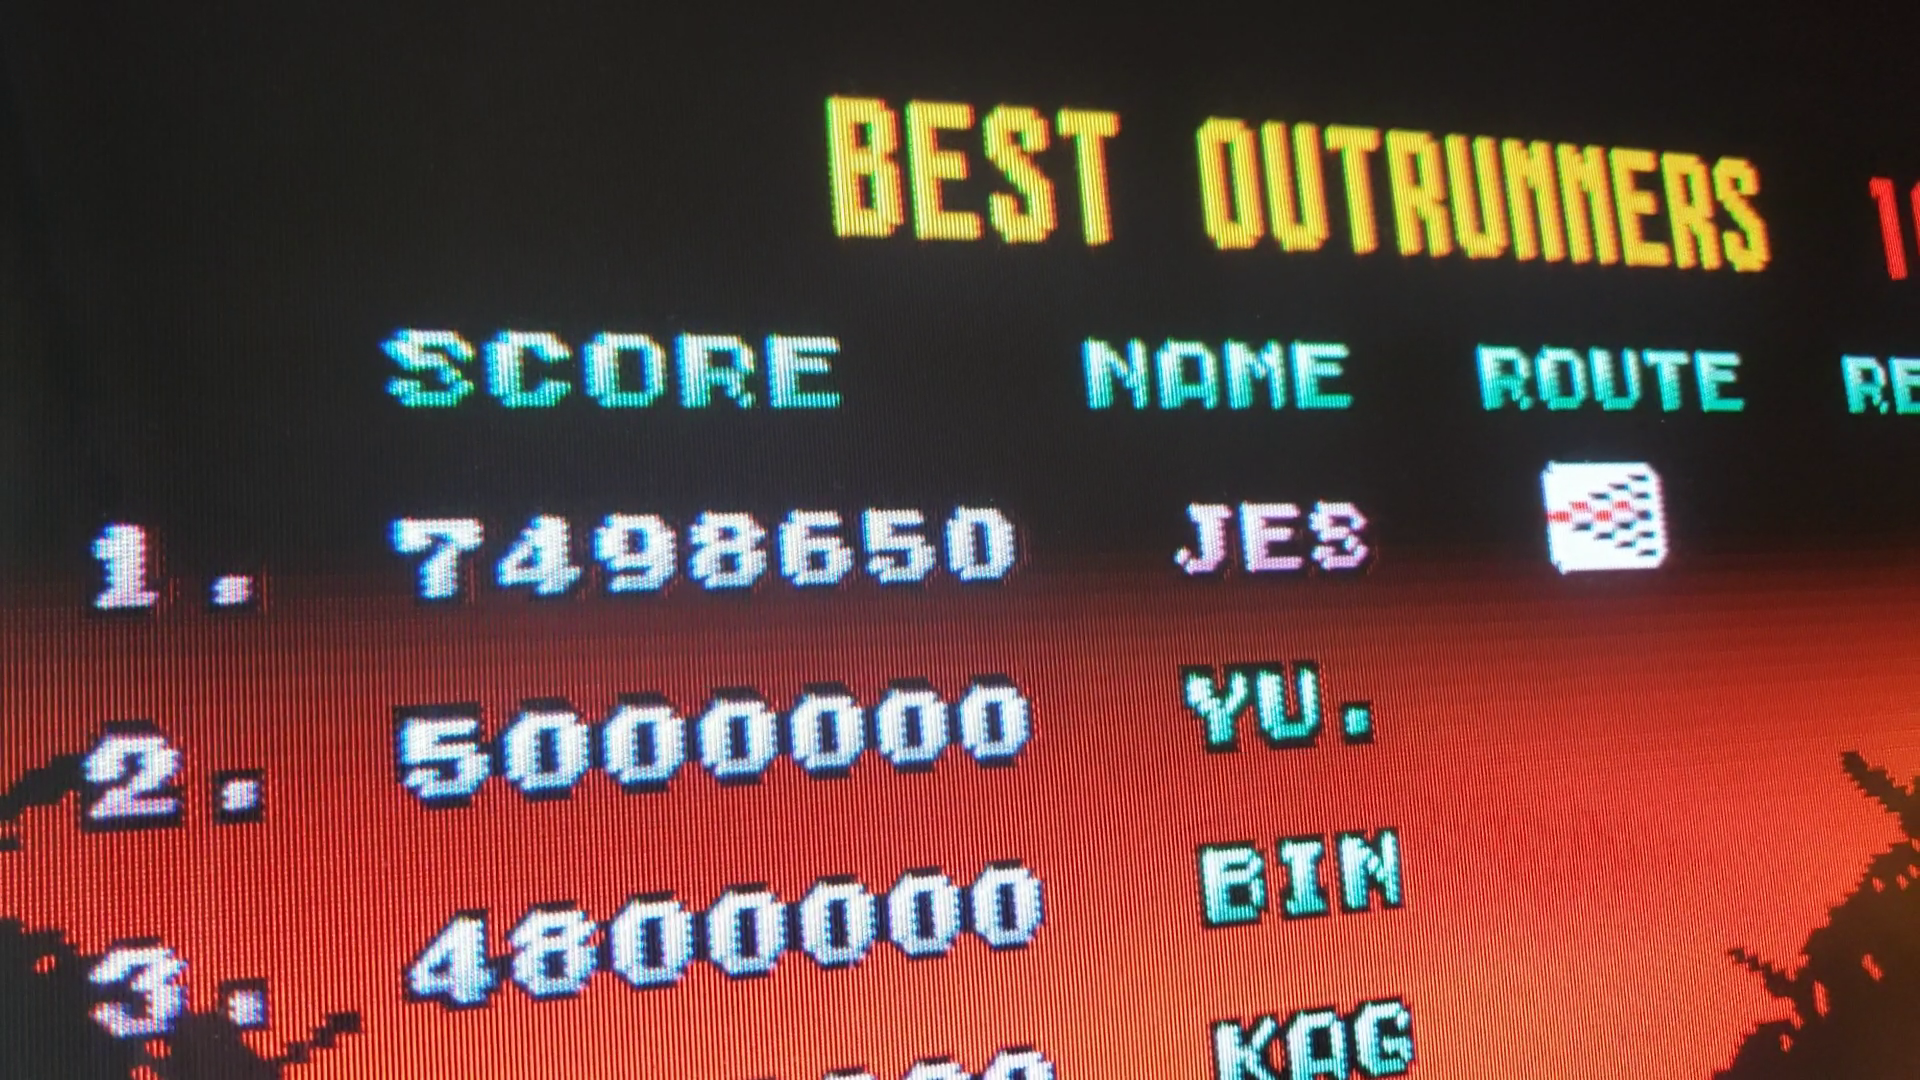 JES: Outrun (Arcade Emulated / M.A.M.E.) 7,498,650 points on 2020-10-07 16:41:08